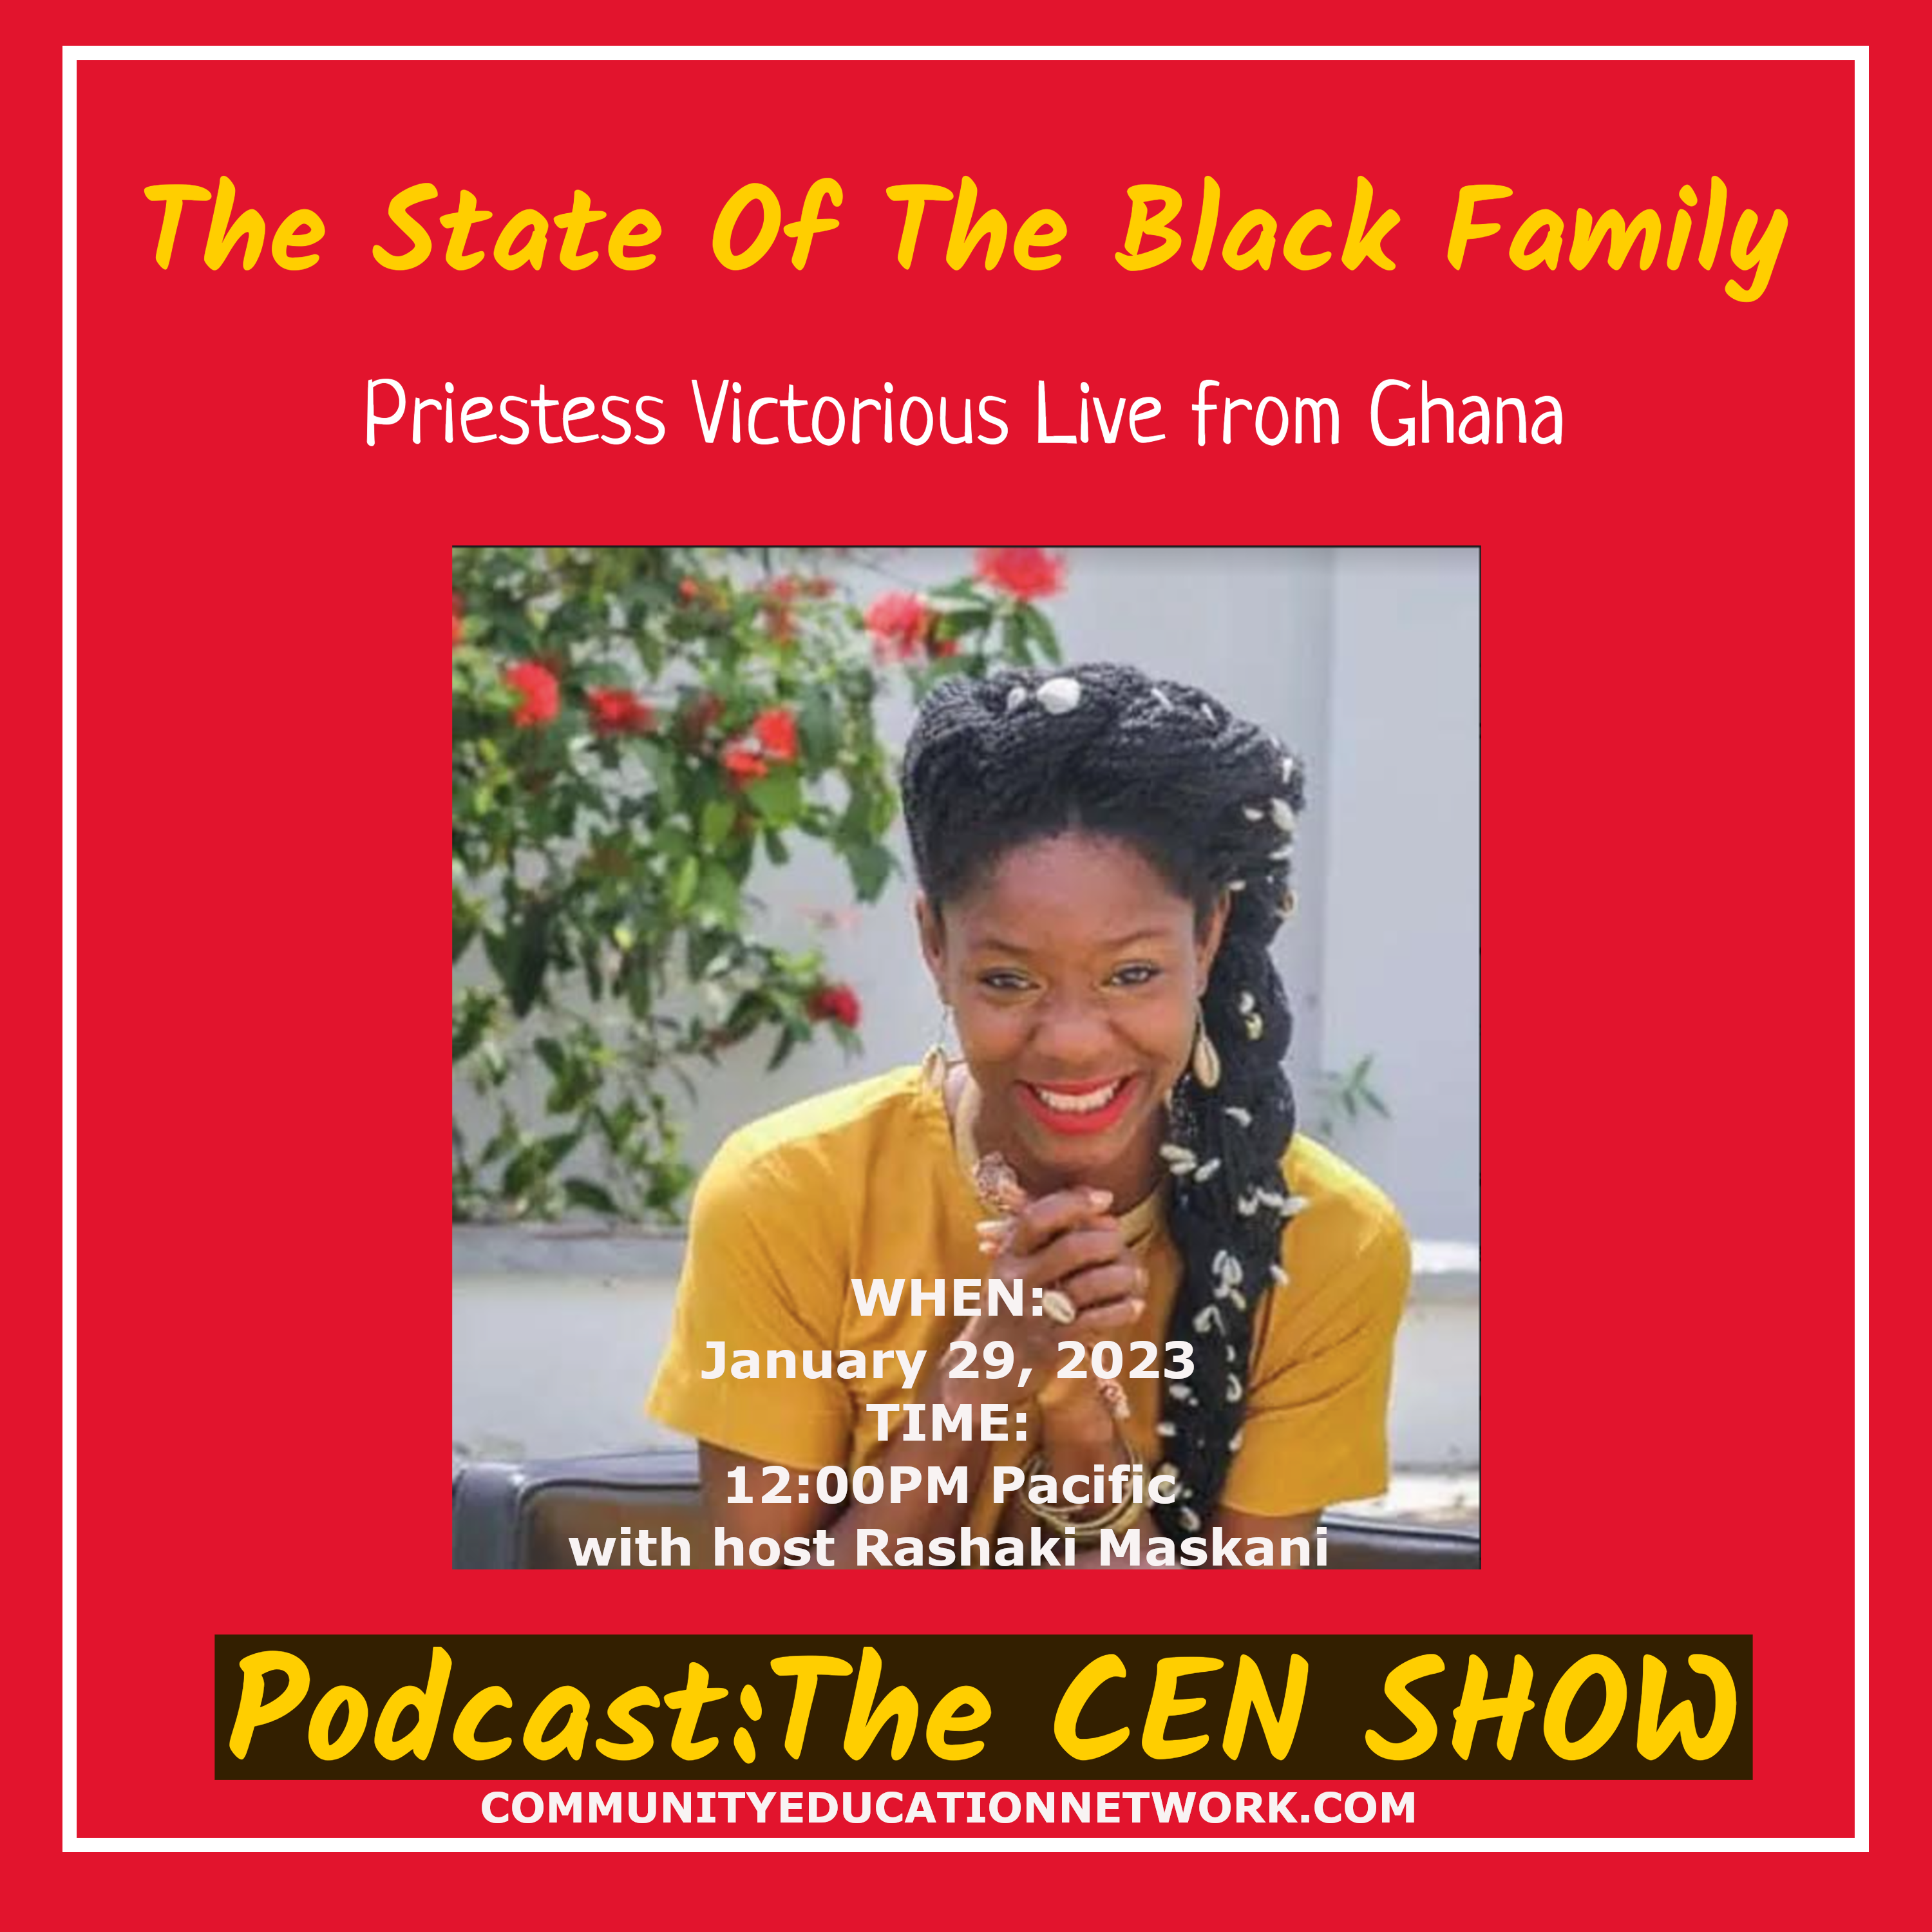 Priestess Victorious Live from Ghana - &#34;The State of the Black Family&#34;